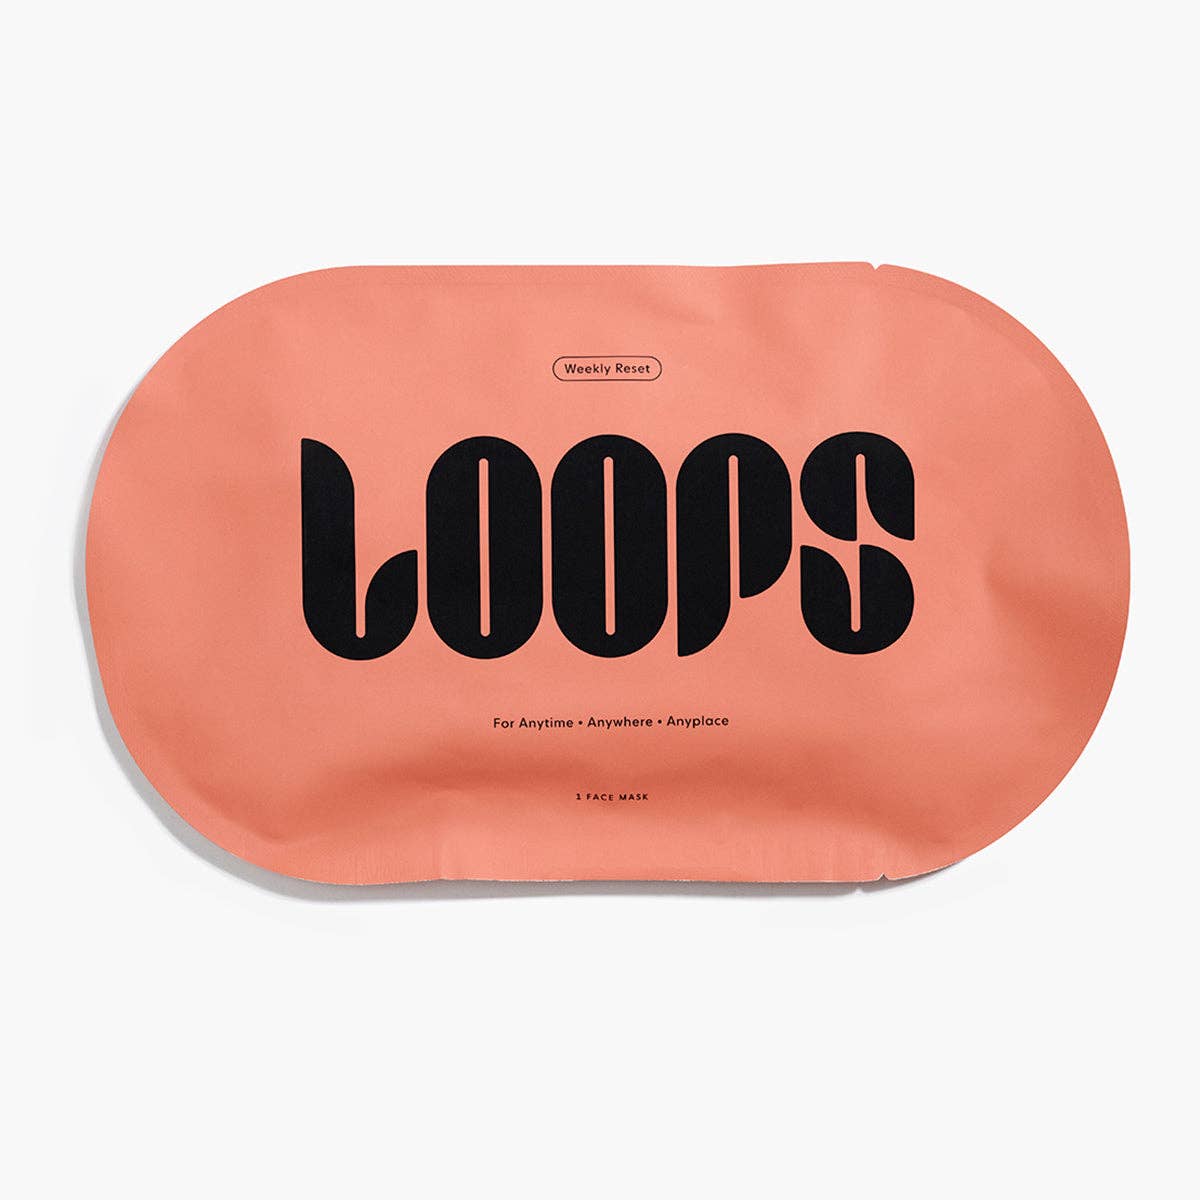 Loops Beauty Weekly Reset Single Mask | MILK MONEY milkmoney.co | natural skin care products. organic skin care. clean beauty products. organic skin care products. natural skincare. vegan skincare. organic skincare. organic beauty products. vegan cruelty free skincare. vegan skincare products